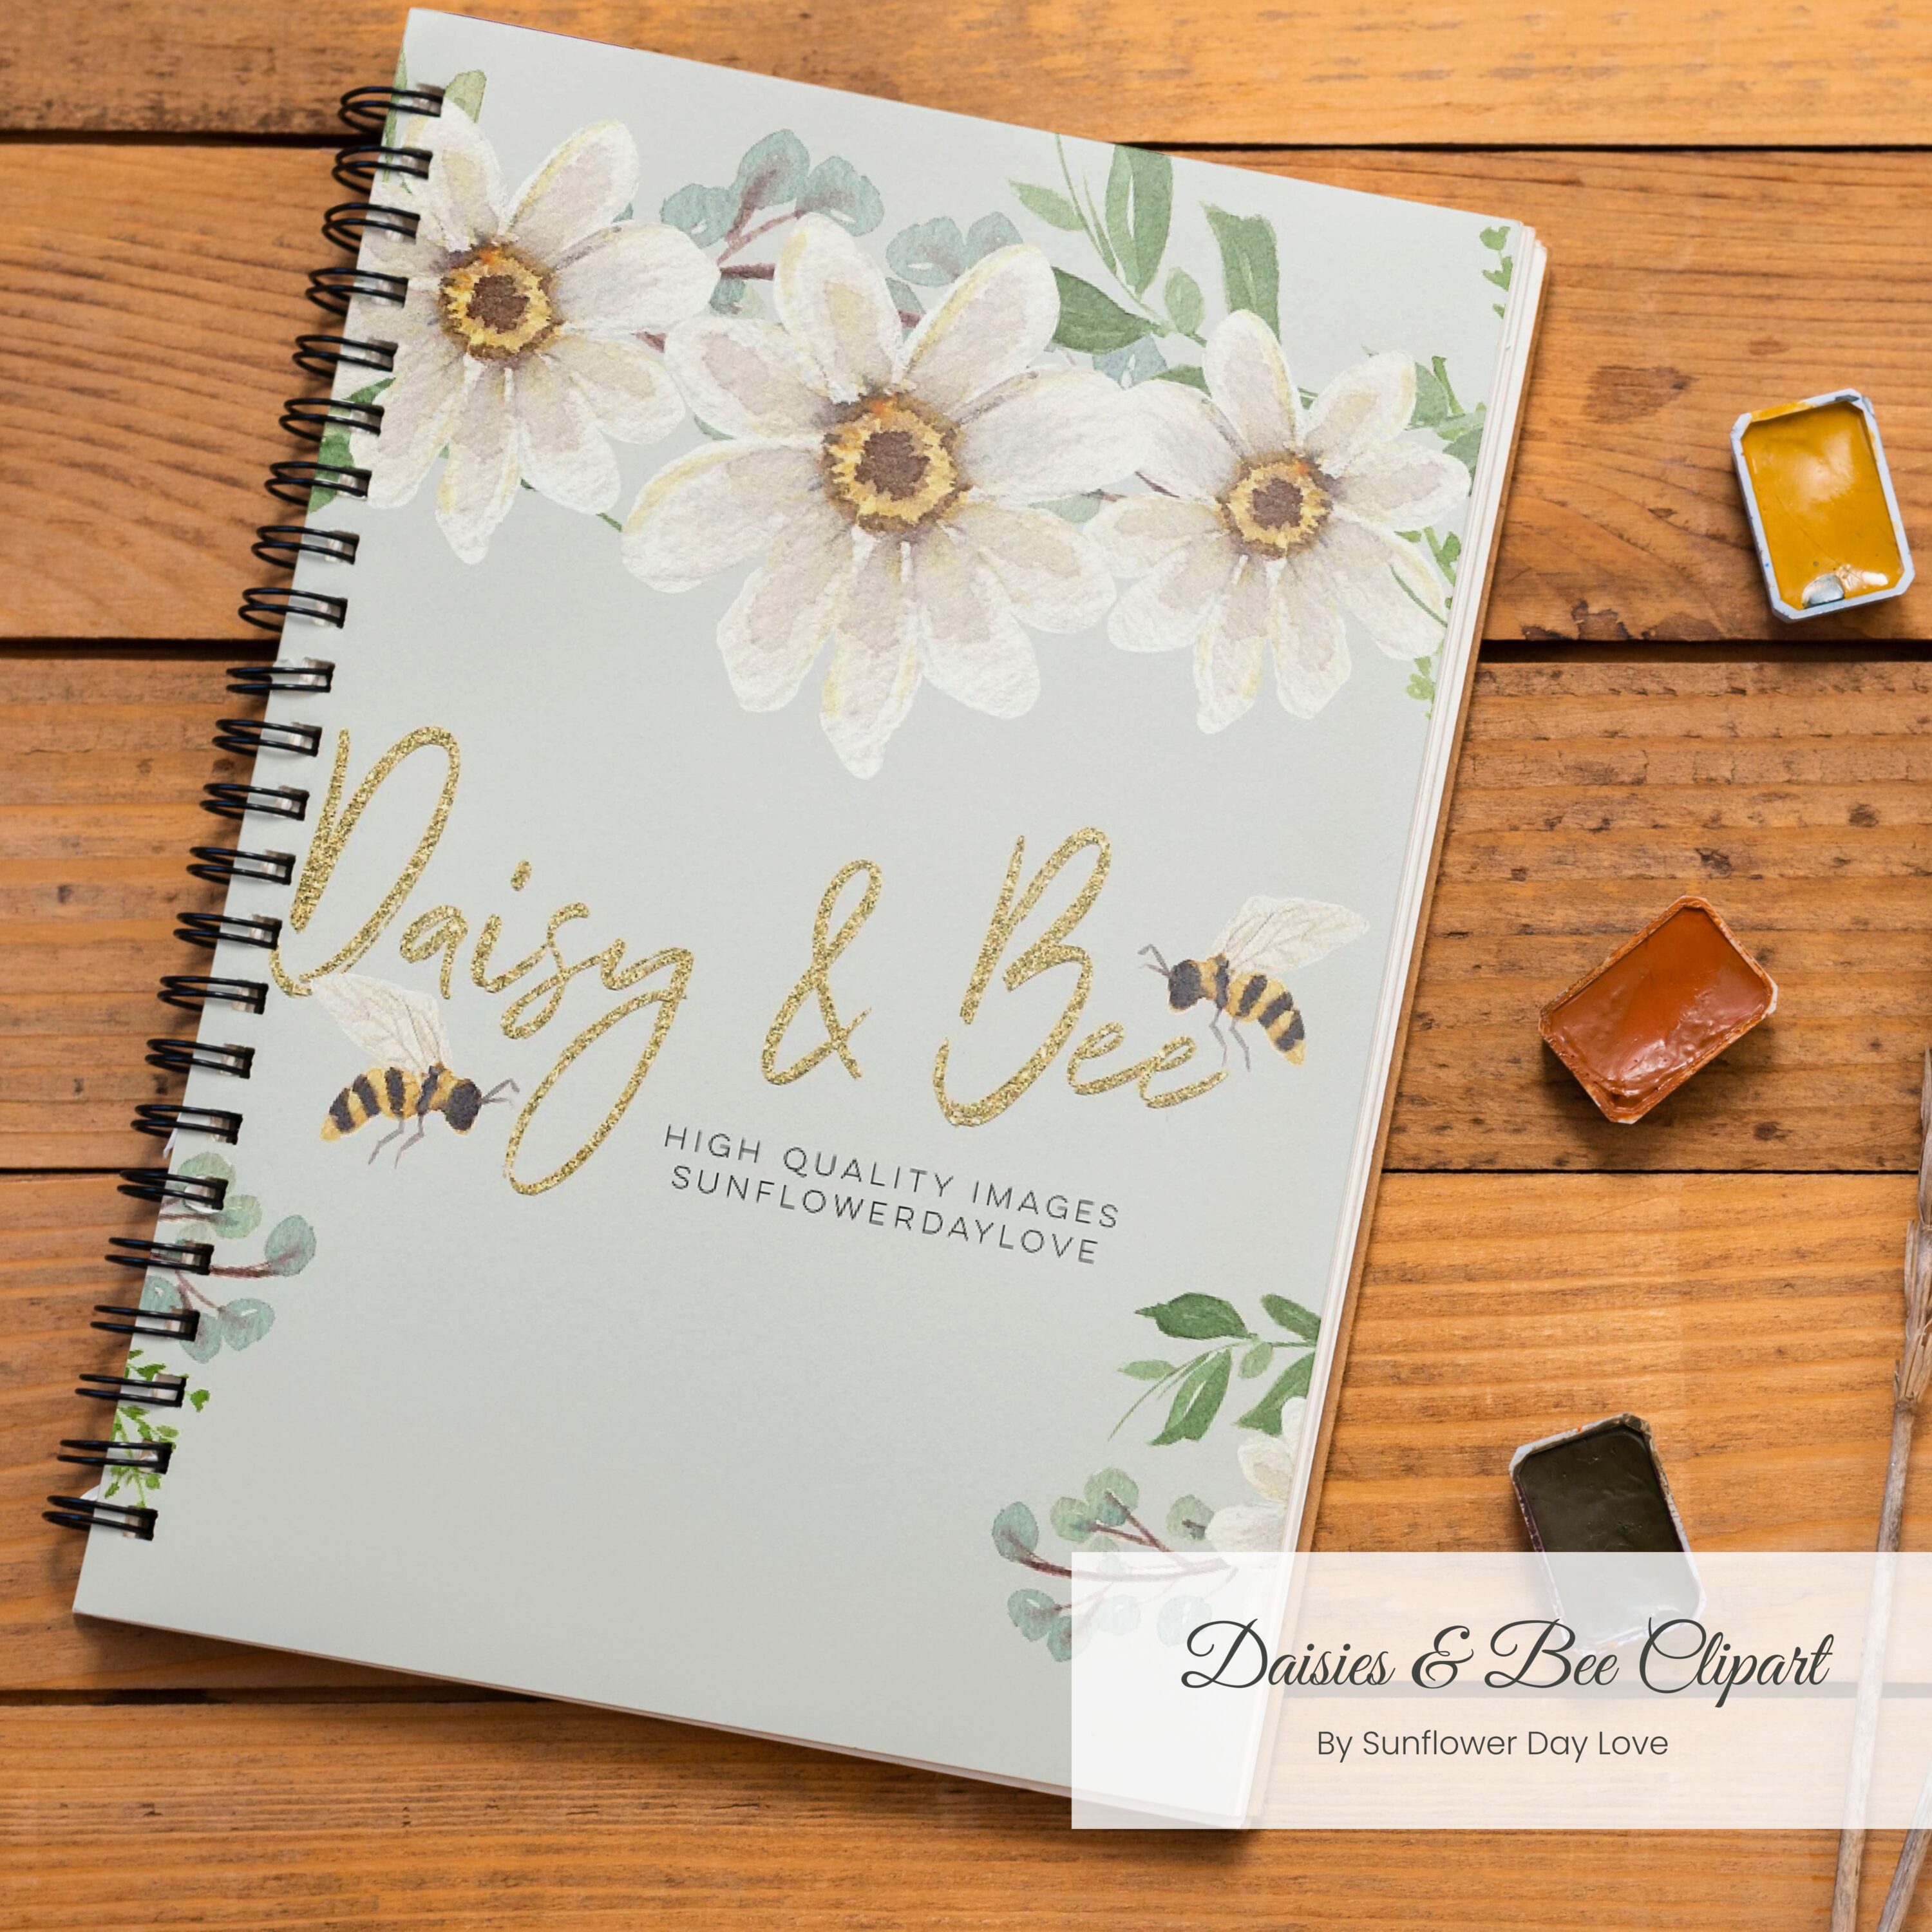 Daisies & Bee Clipart cover.